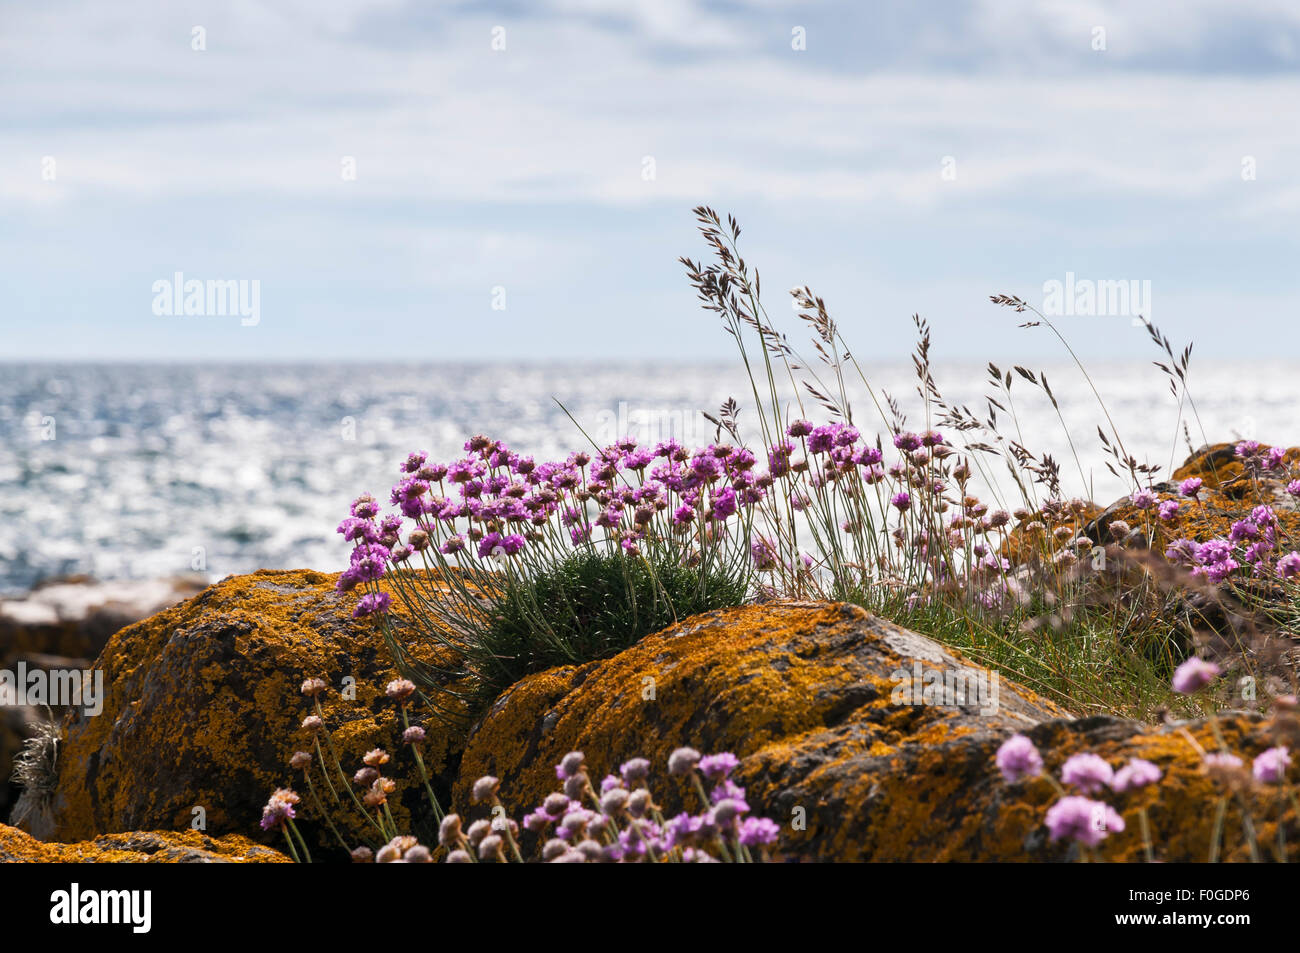 Sea Thrift, Armeria maritima, or sea pinks growing amongst the lichen covered rocks on the Isle of Arran, Scotland Stock Photo